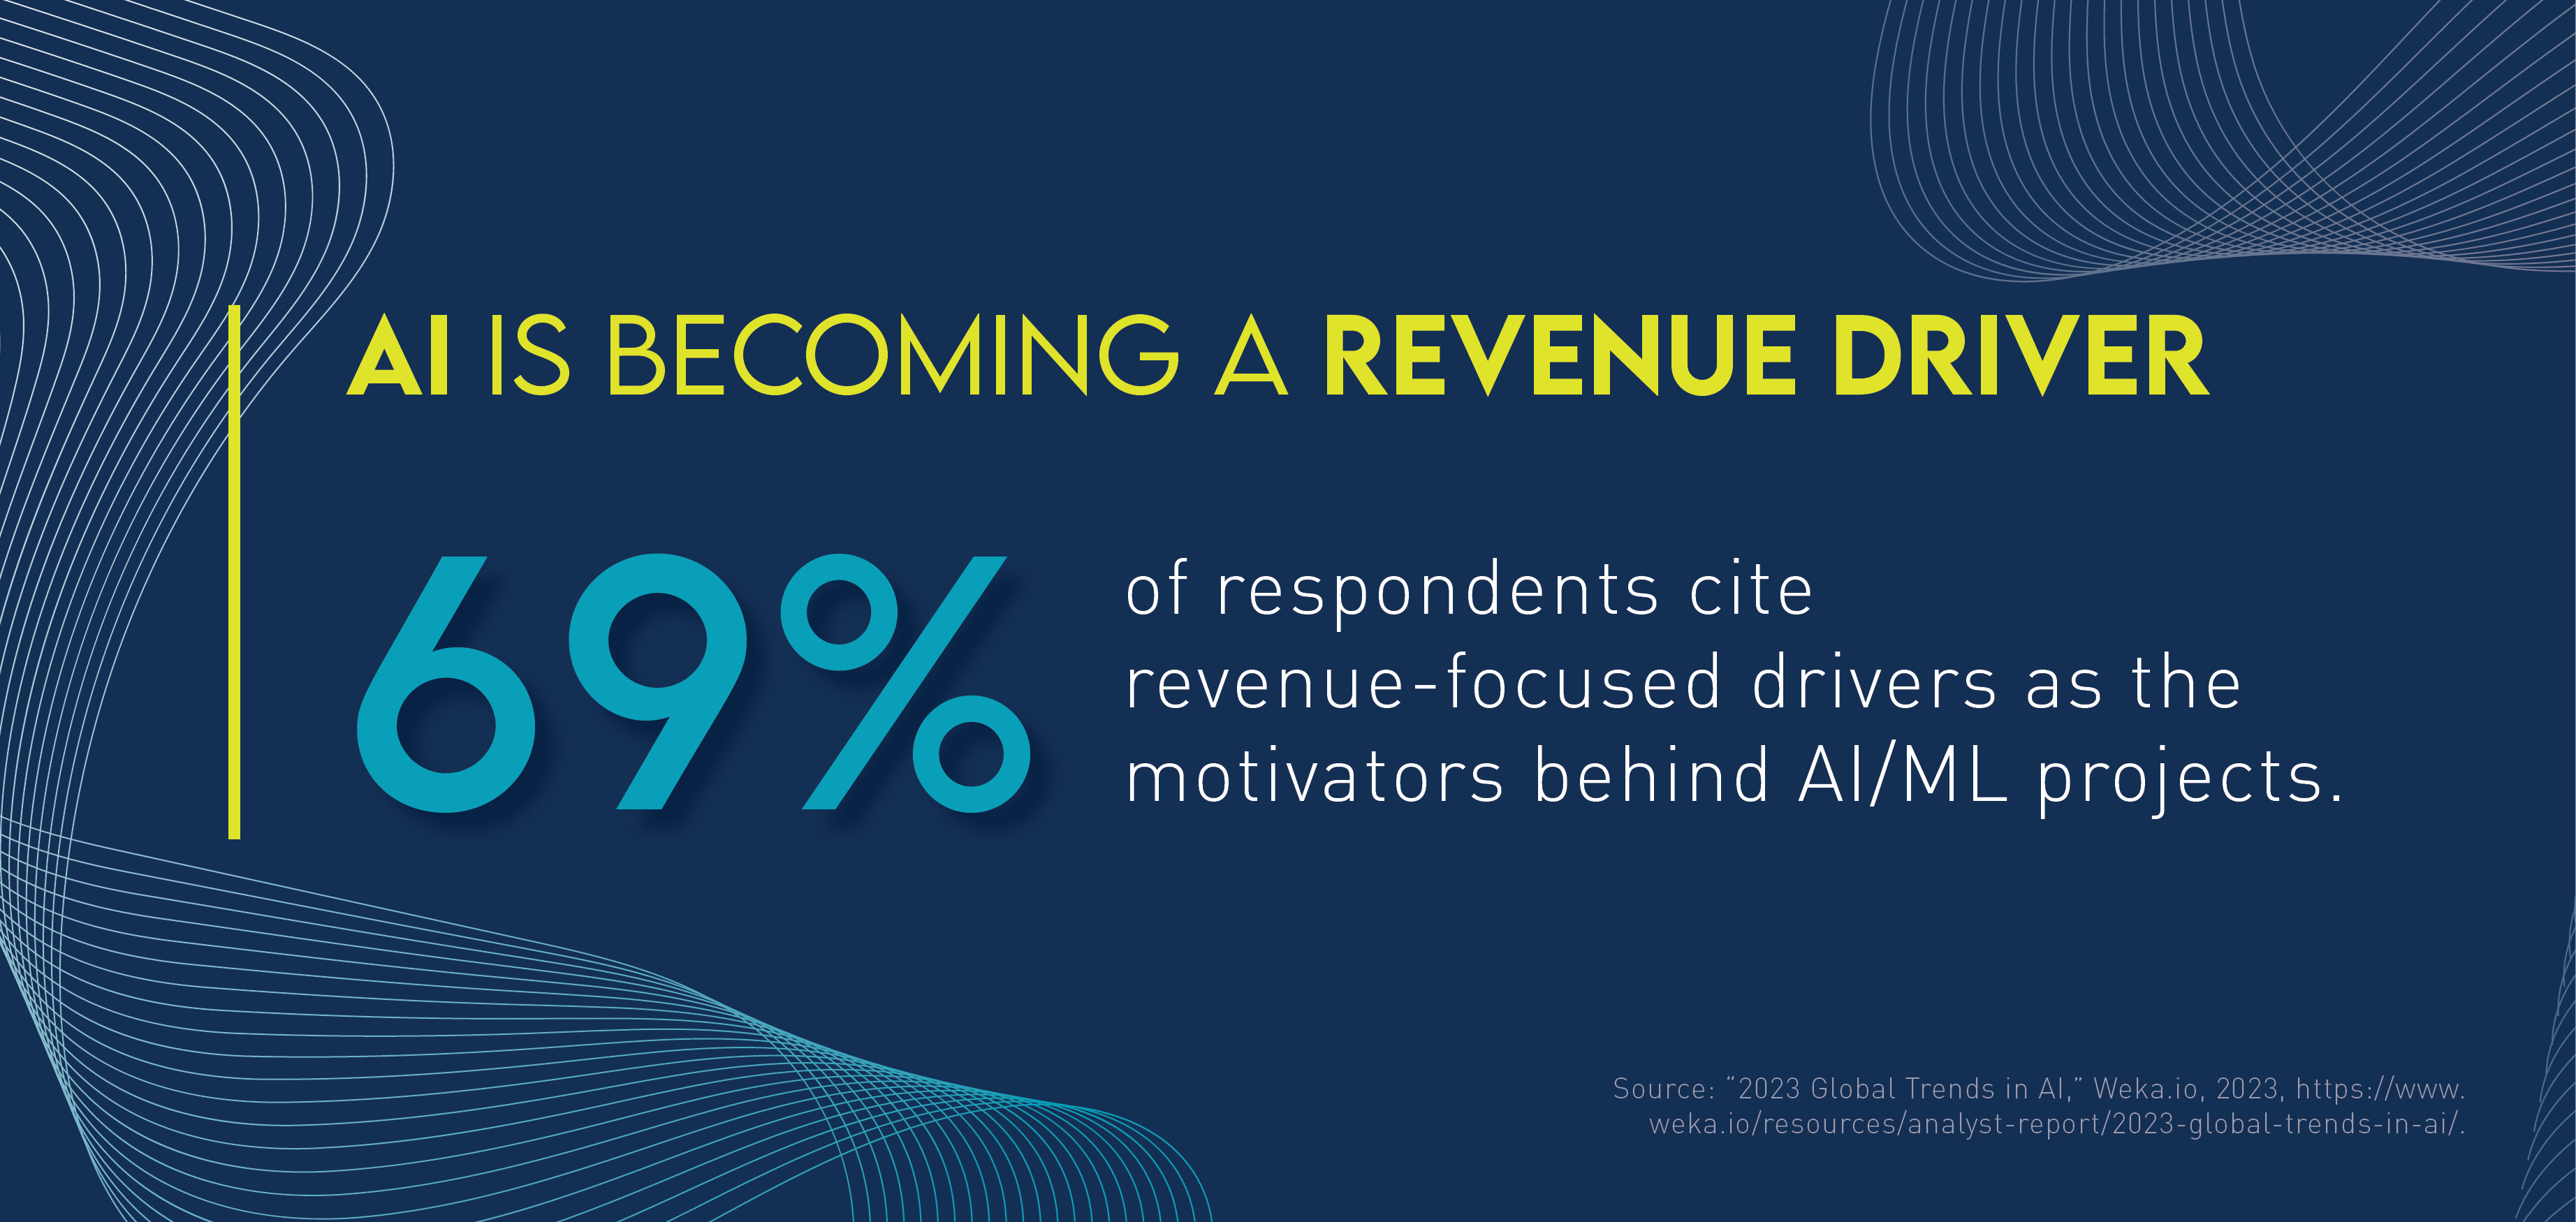 Graphic with text that says: "AI is becoming a revenue driver. 69% of respondents cite revenue-focused drivers as the motivators behind AI/ML projects."